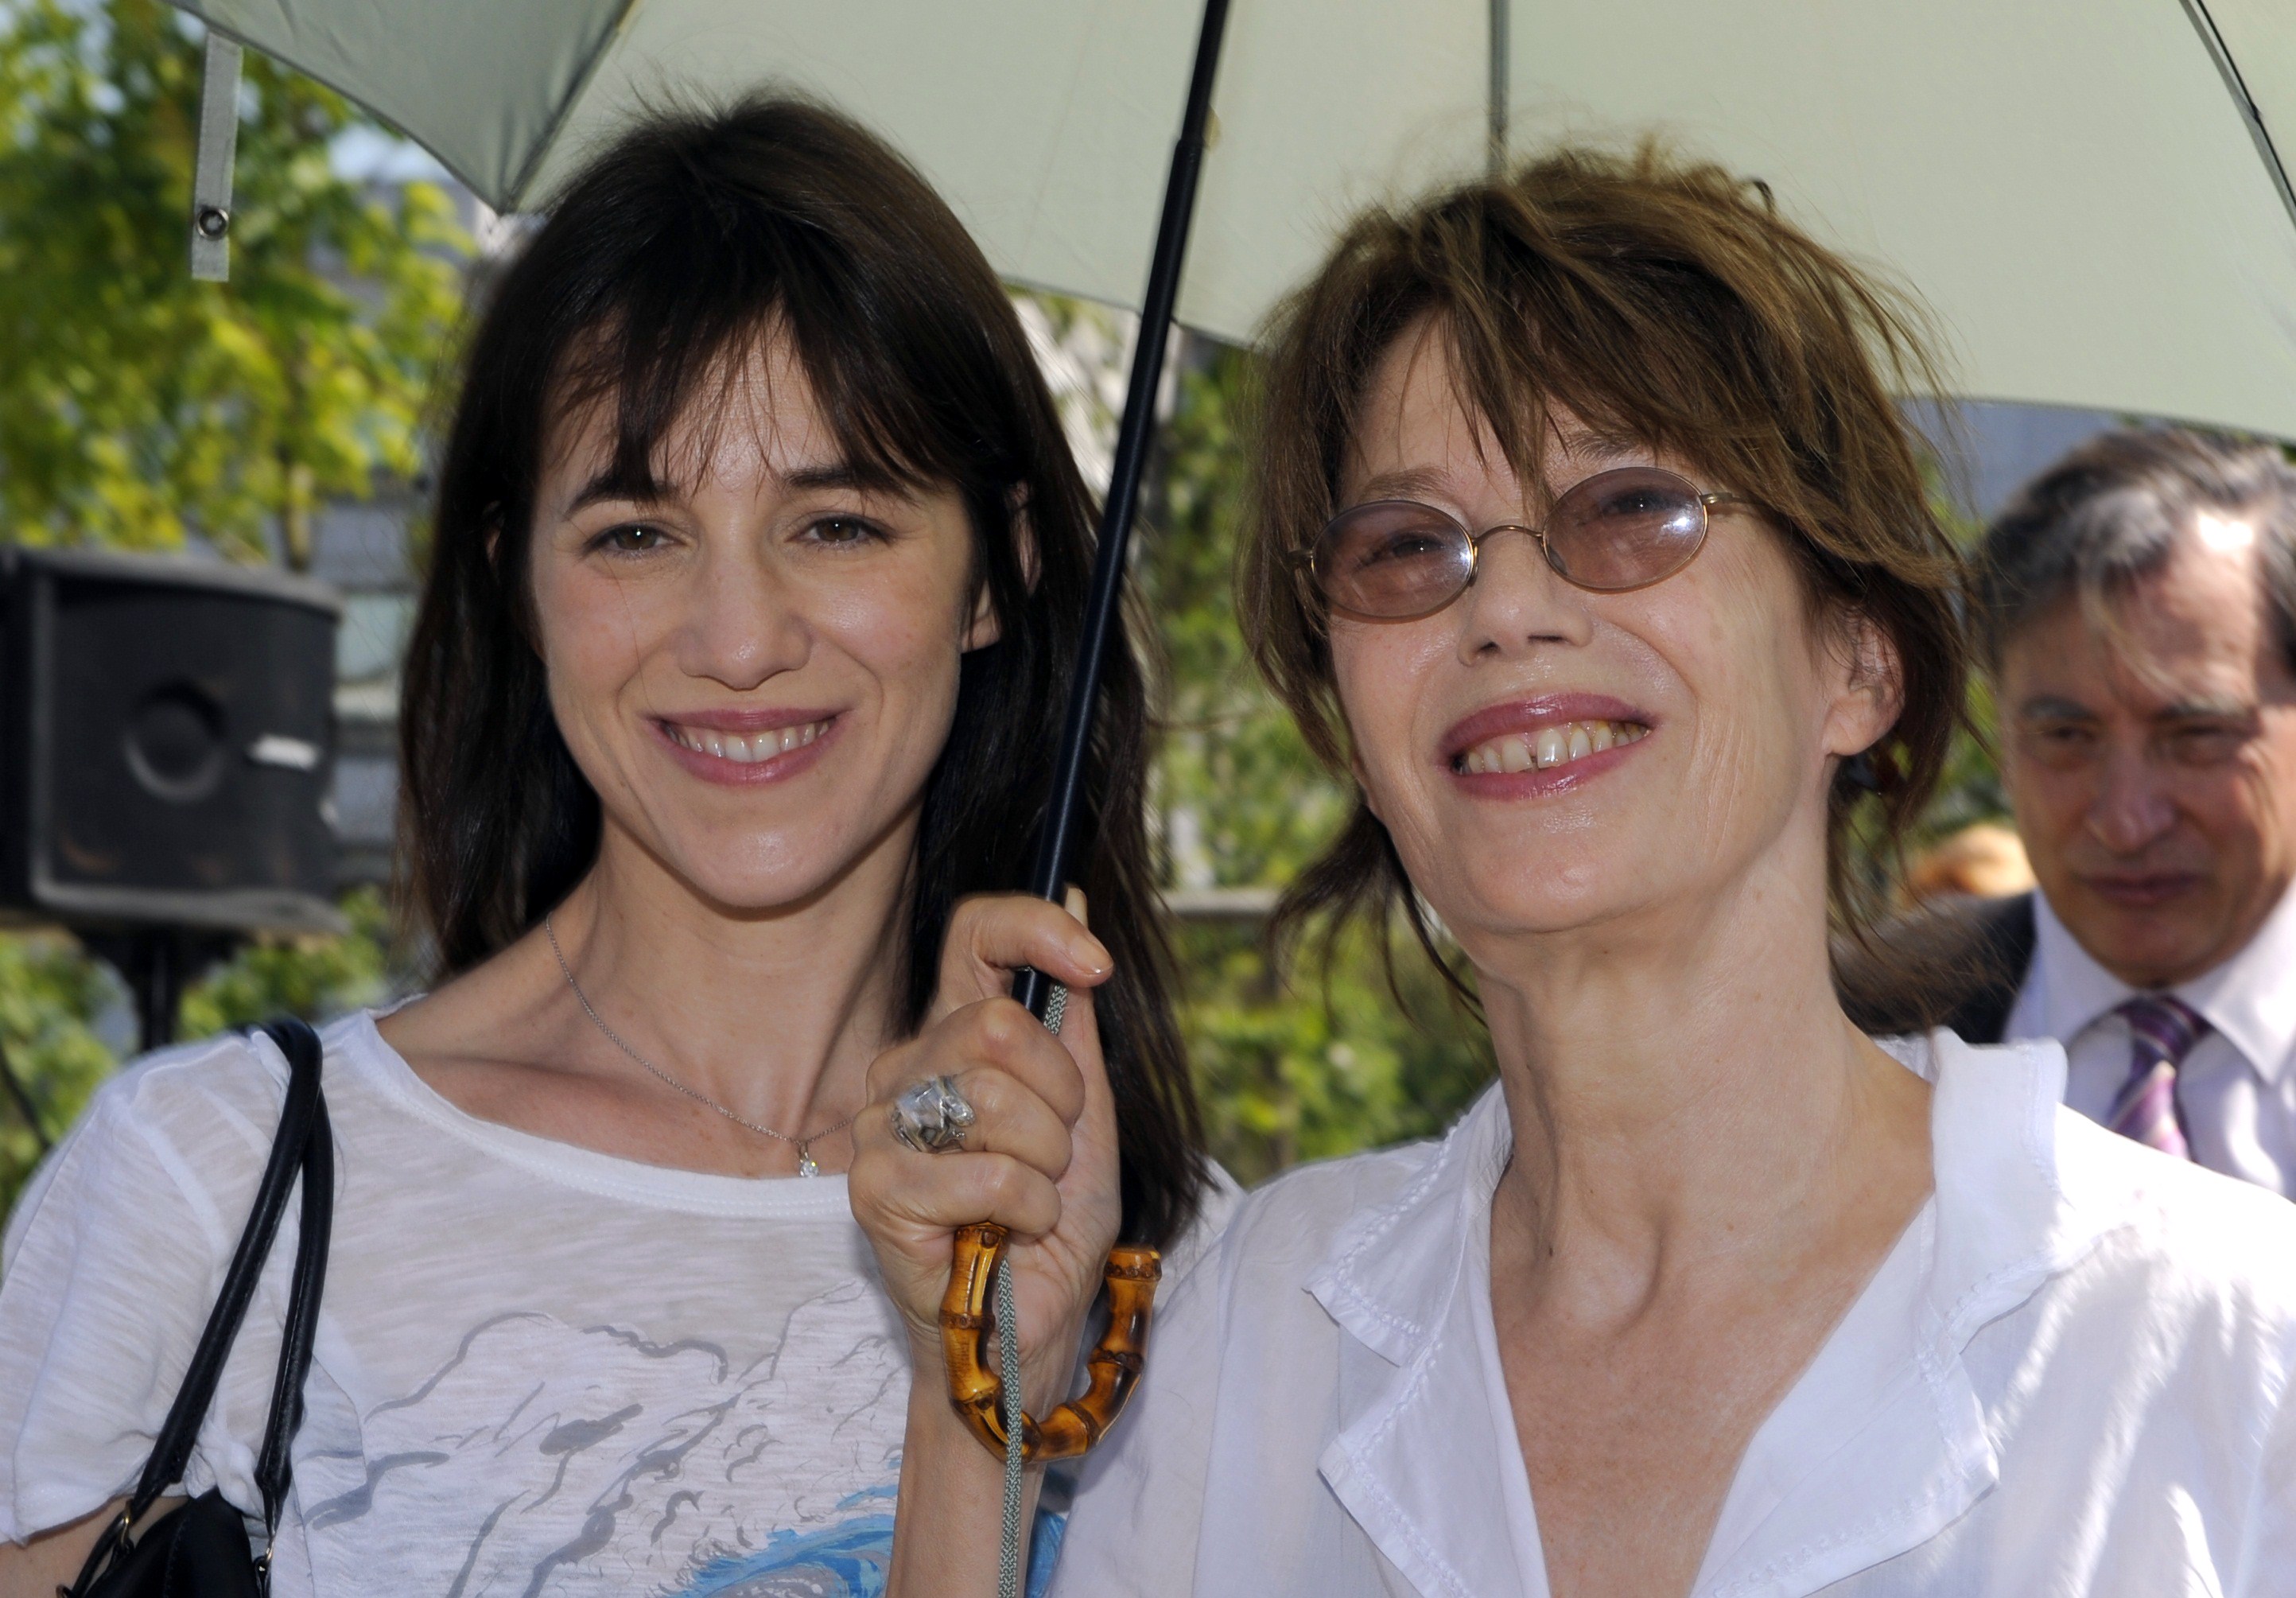 Charlotte Gainsbourg (L) and Jane Birkin in Paris on July 8, 2010 | Source: Getty Images